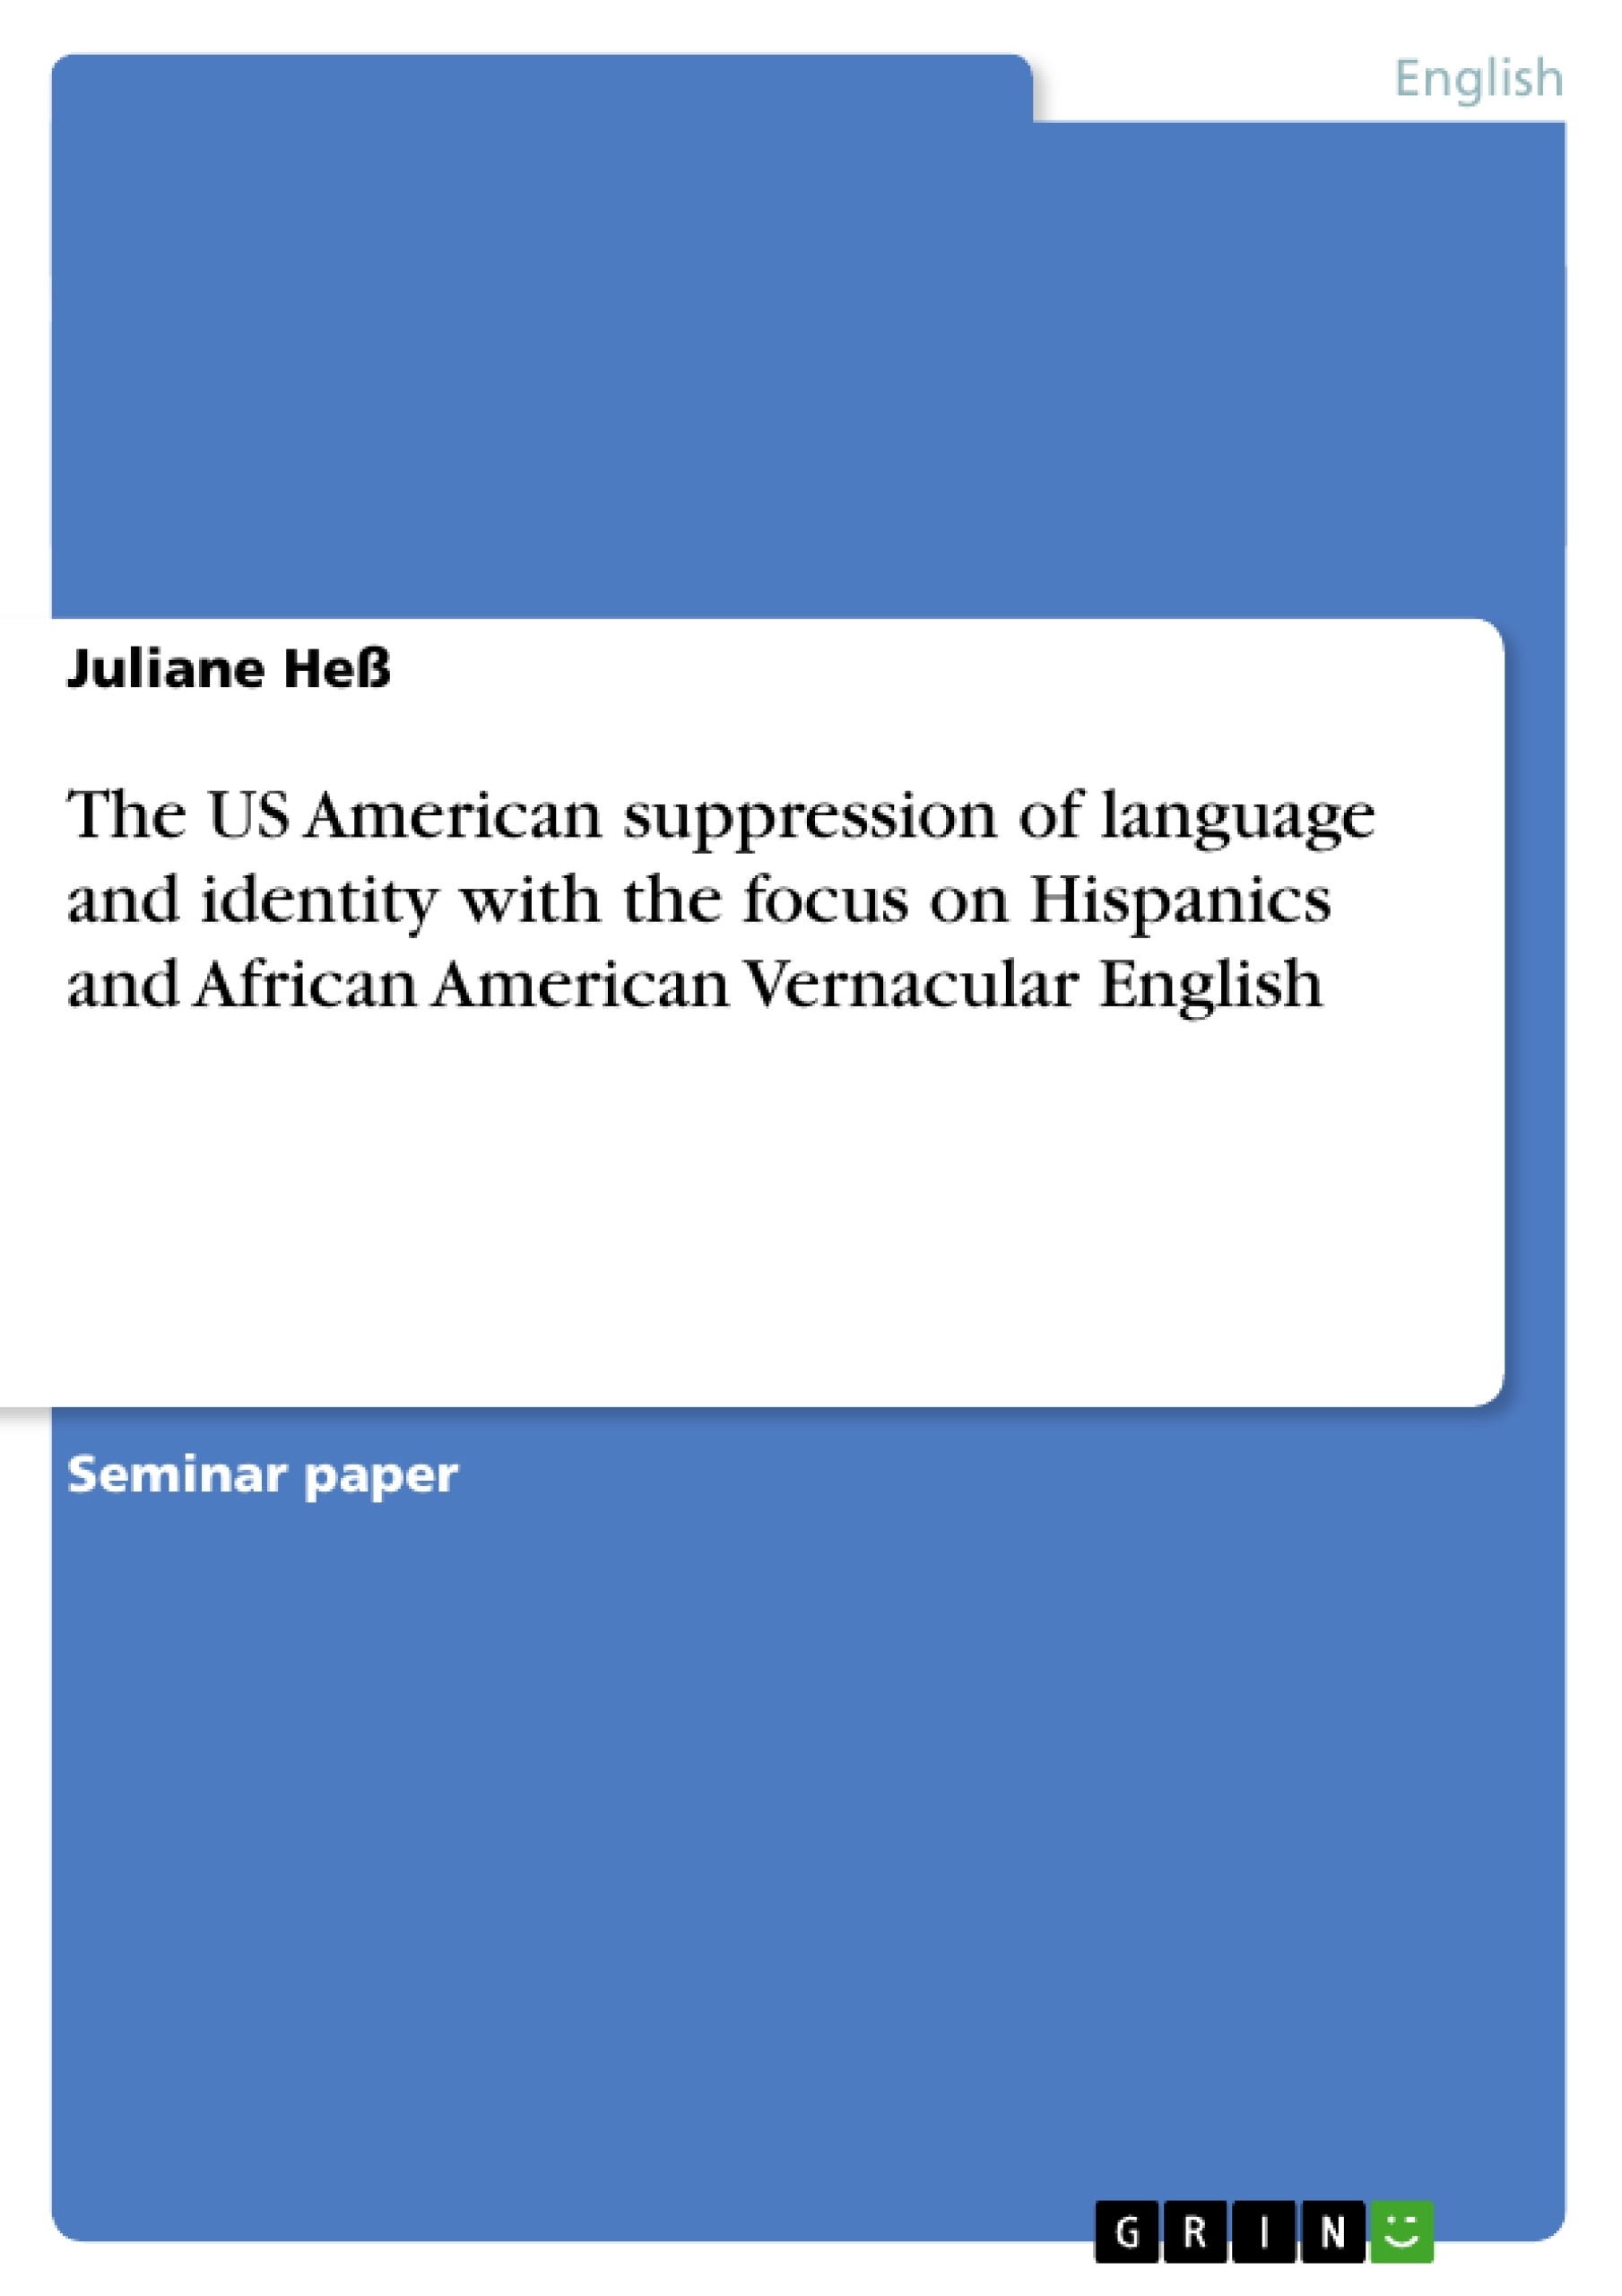 Title: The US American suppression of language and identity with the focus on Hispanics and African American Vernacular English